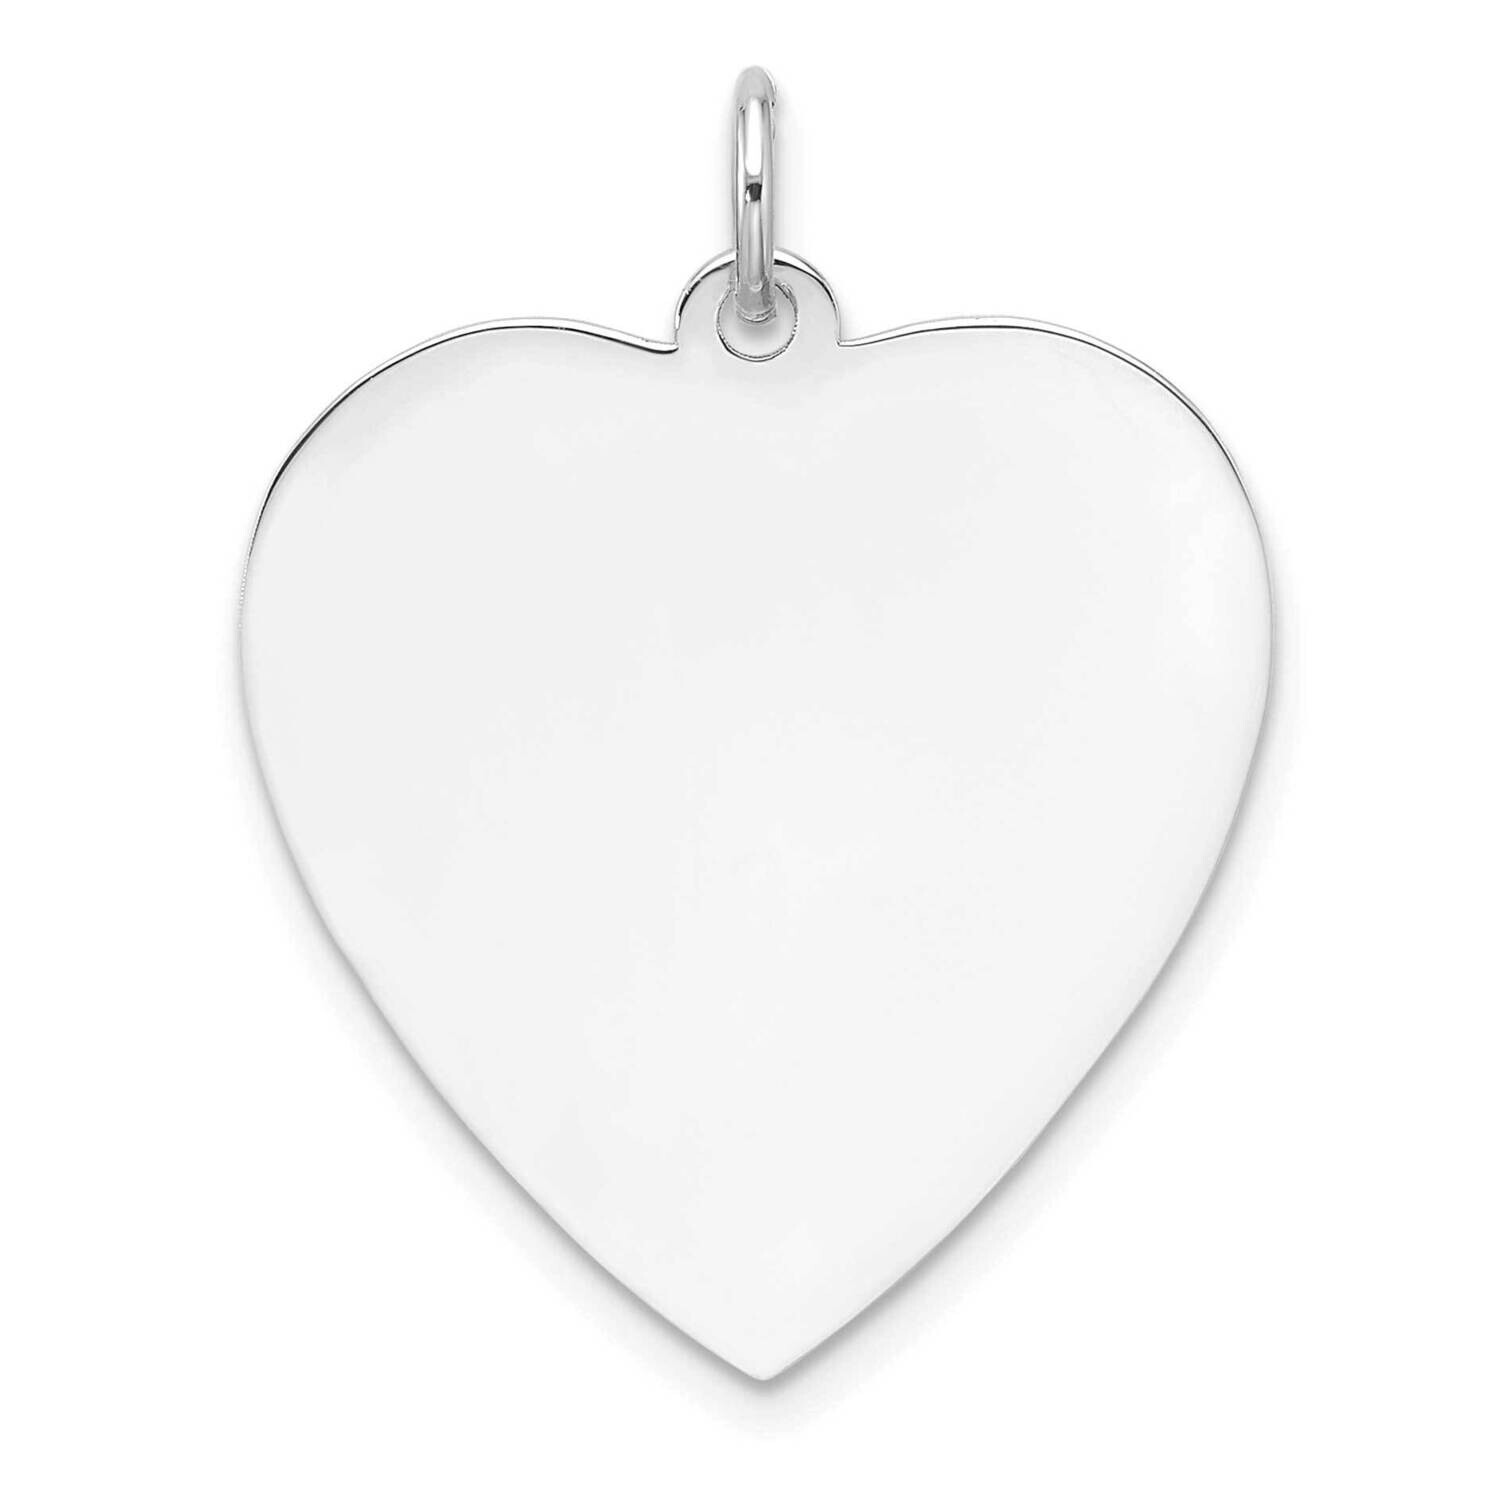 Rhod-Plated Eng. Heart Polish Front Satin Back Disc Charm Sterling Silver QM548/50